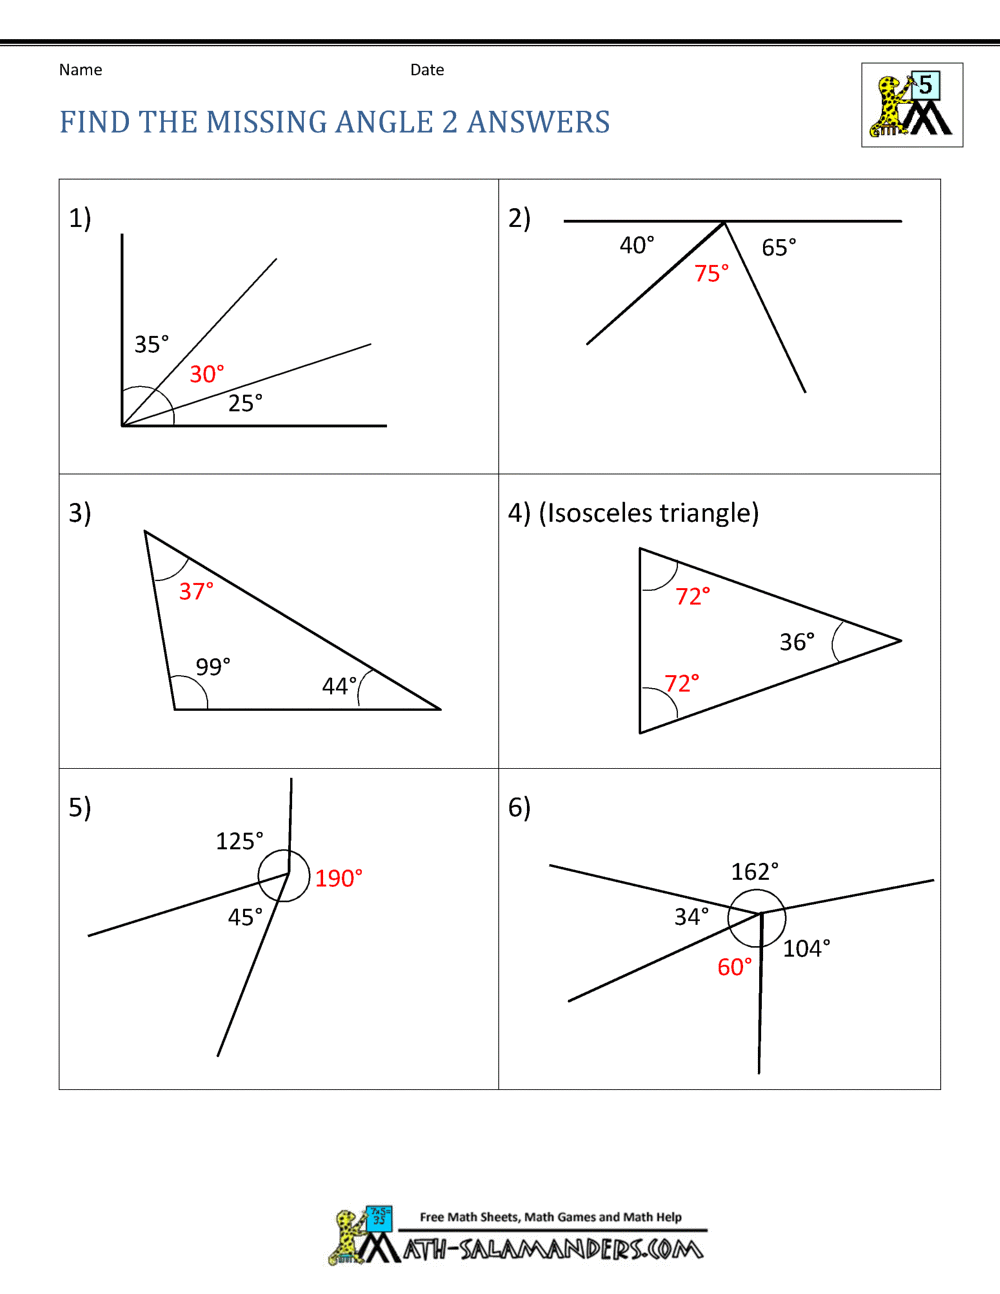 11th Grade Geometry For Finding Missing Angles Worksheet